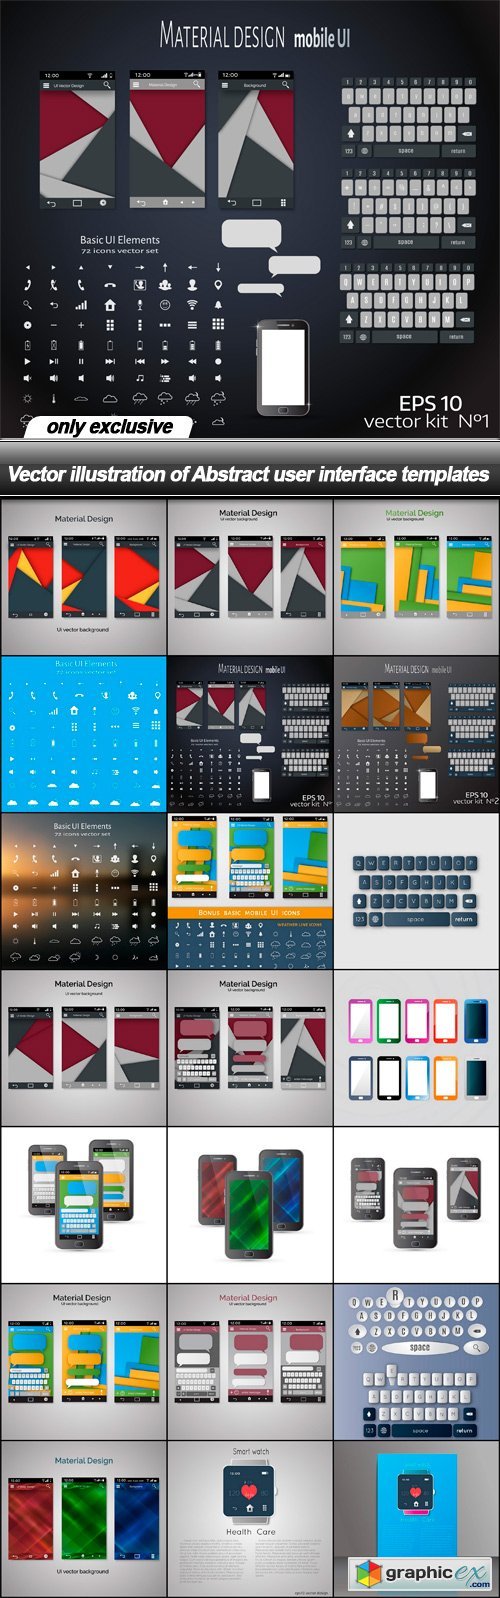 illustration of Abstract user interface templates - 21 EPS